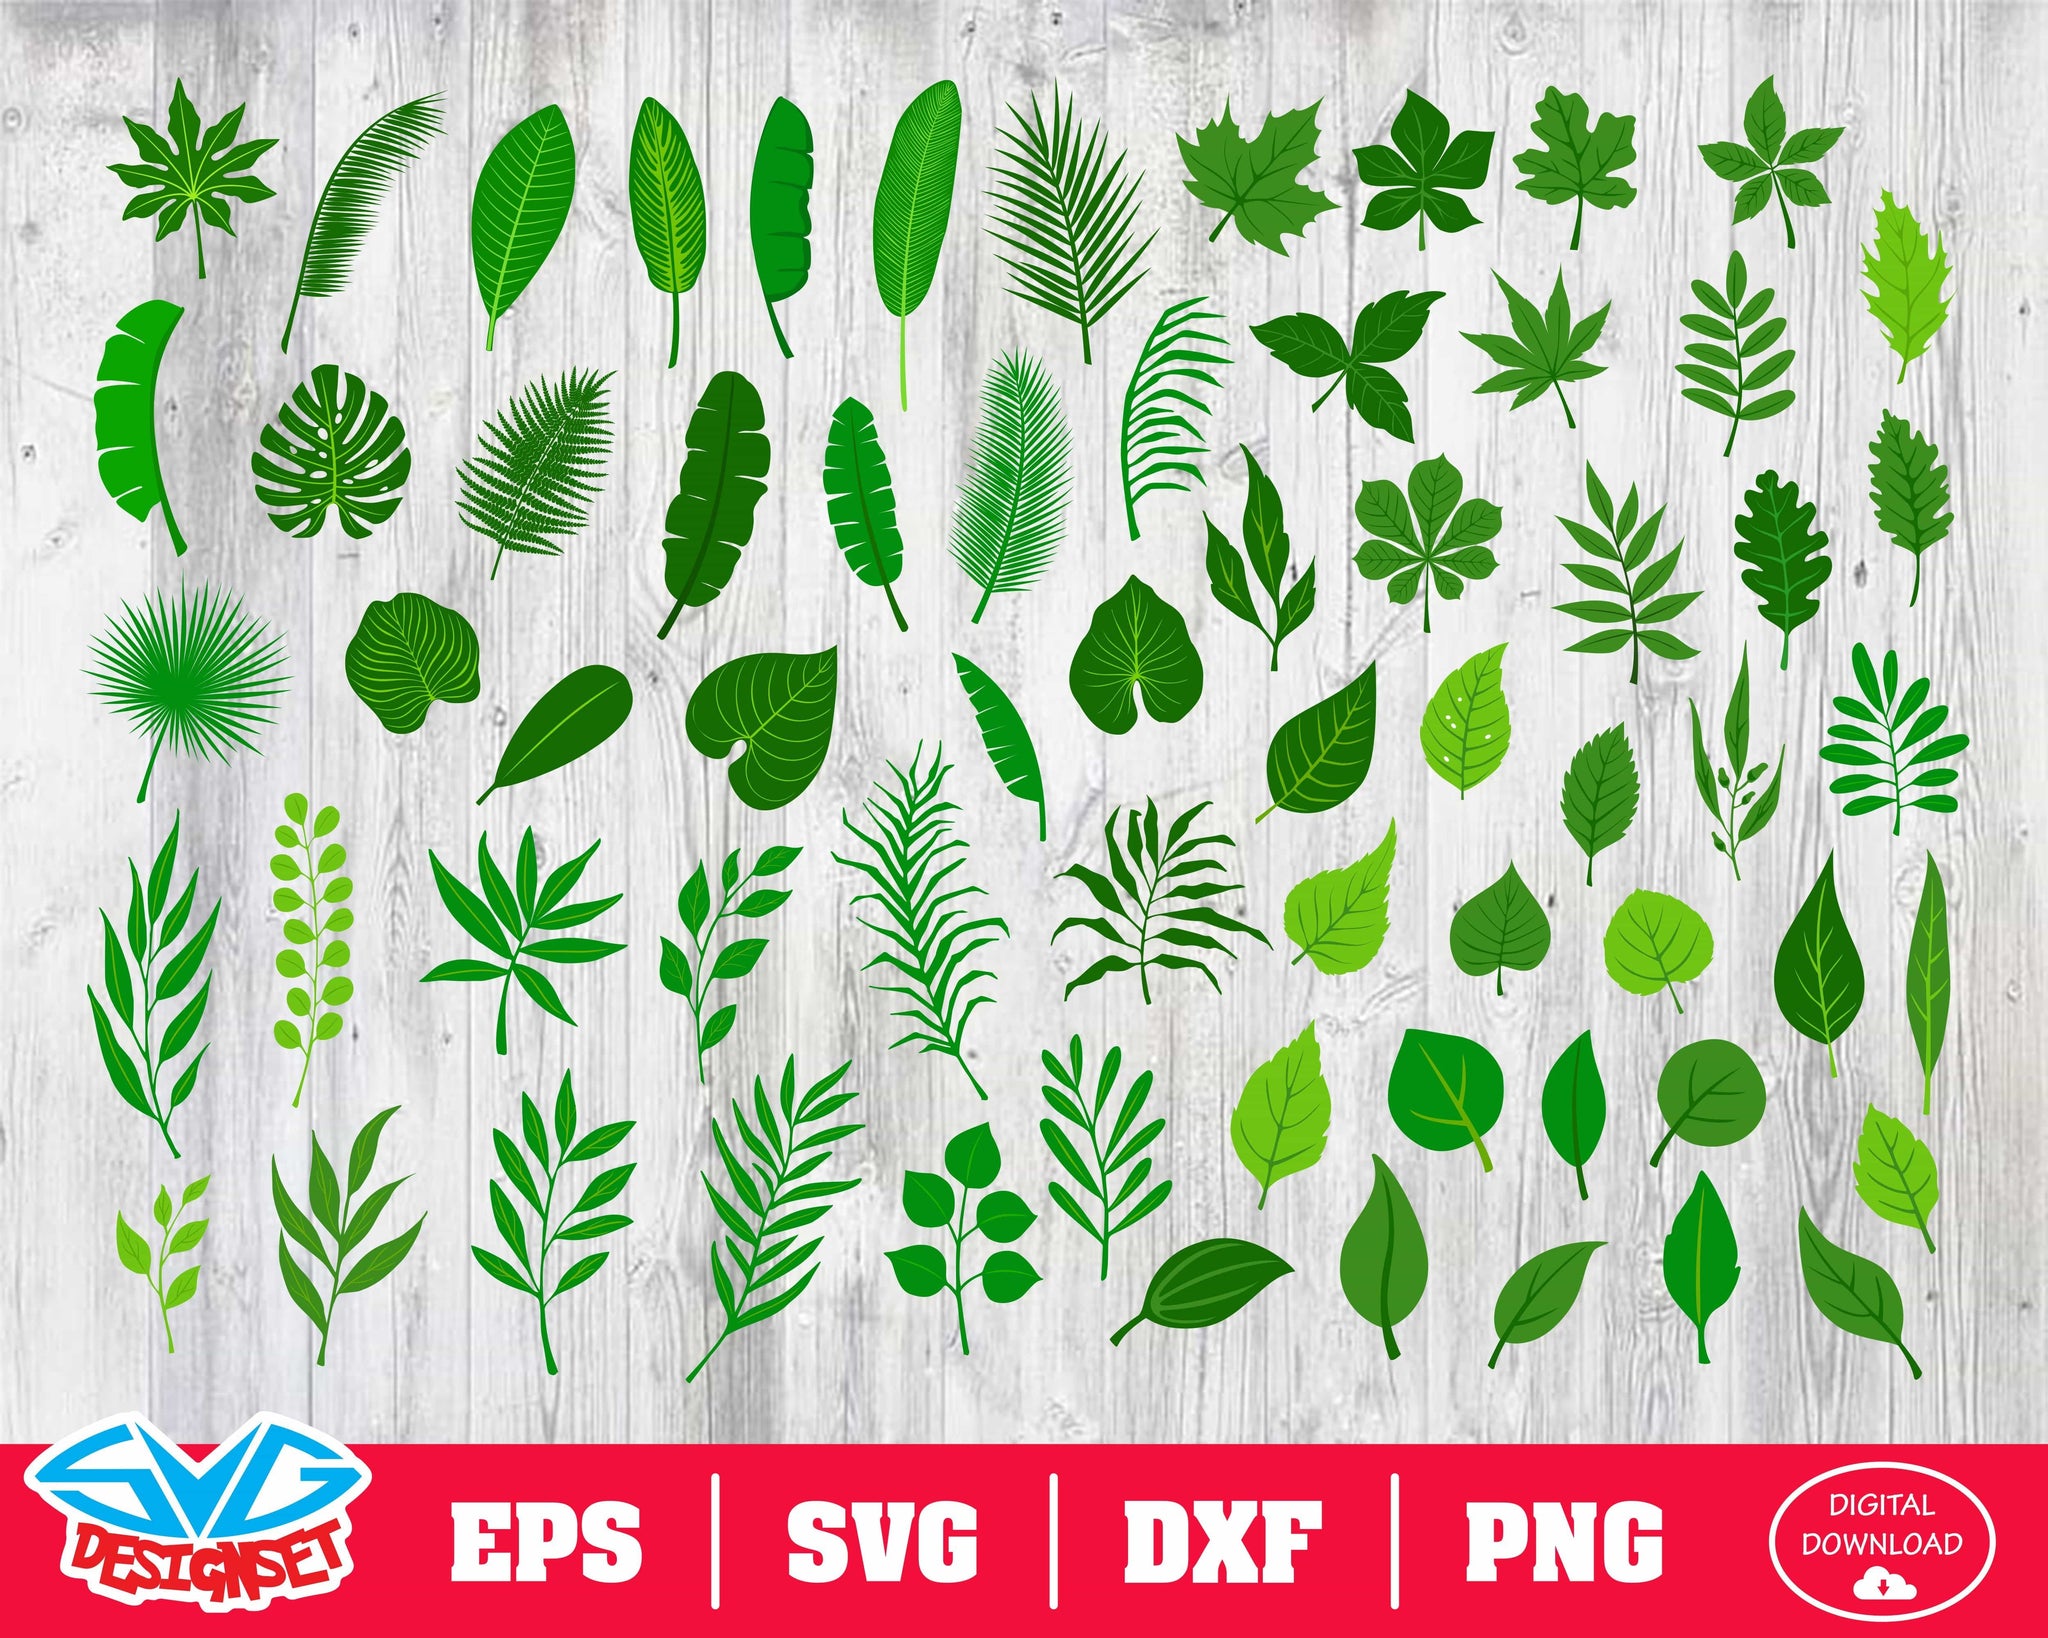 Tropical leaves Svg, Dxf, Eps, Png, Clipart, Silhouette and Cutfiles - SVGDesignSets